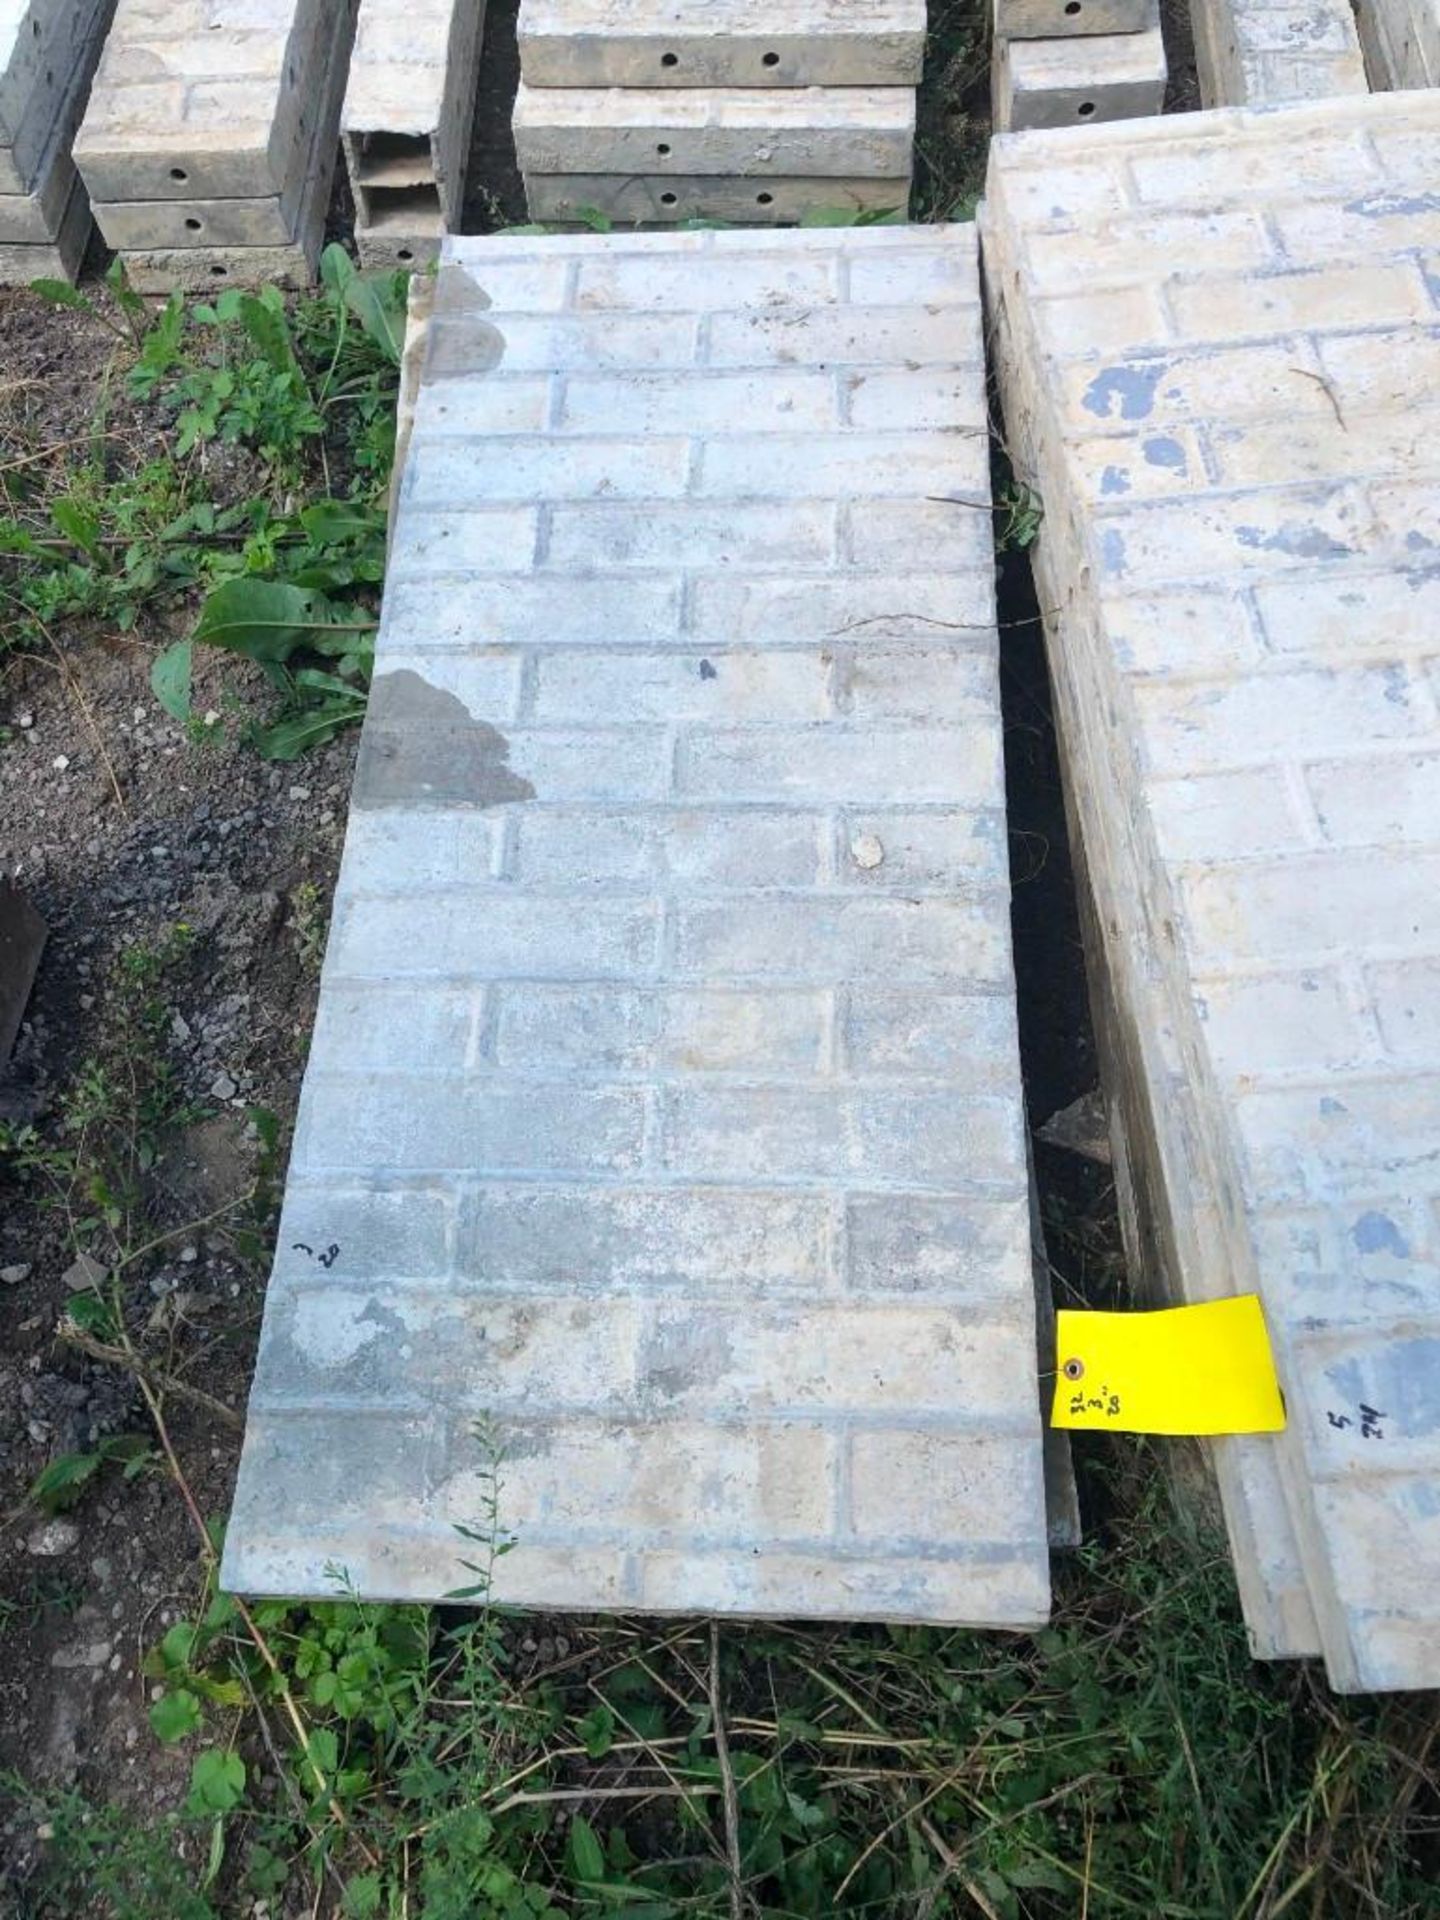 (3) 20" x 4' Symons Aluminum Concrete Forms, Smooth Brick 6-12 Hole Pattern. Located at 2086 E US